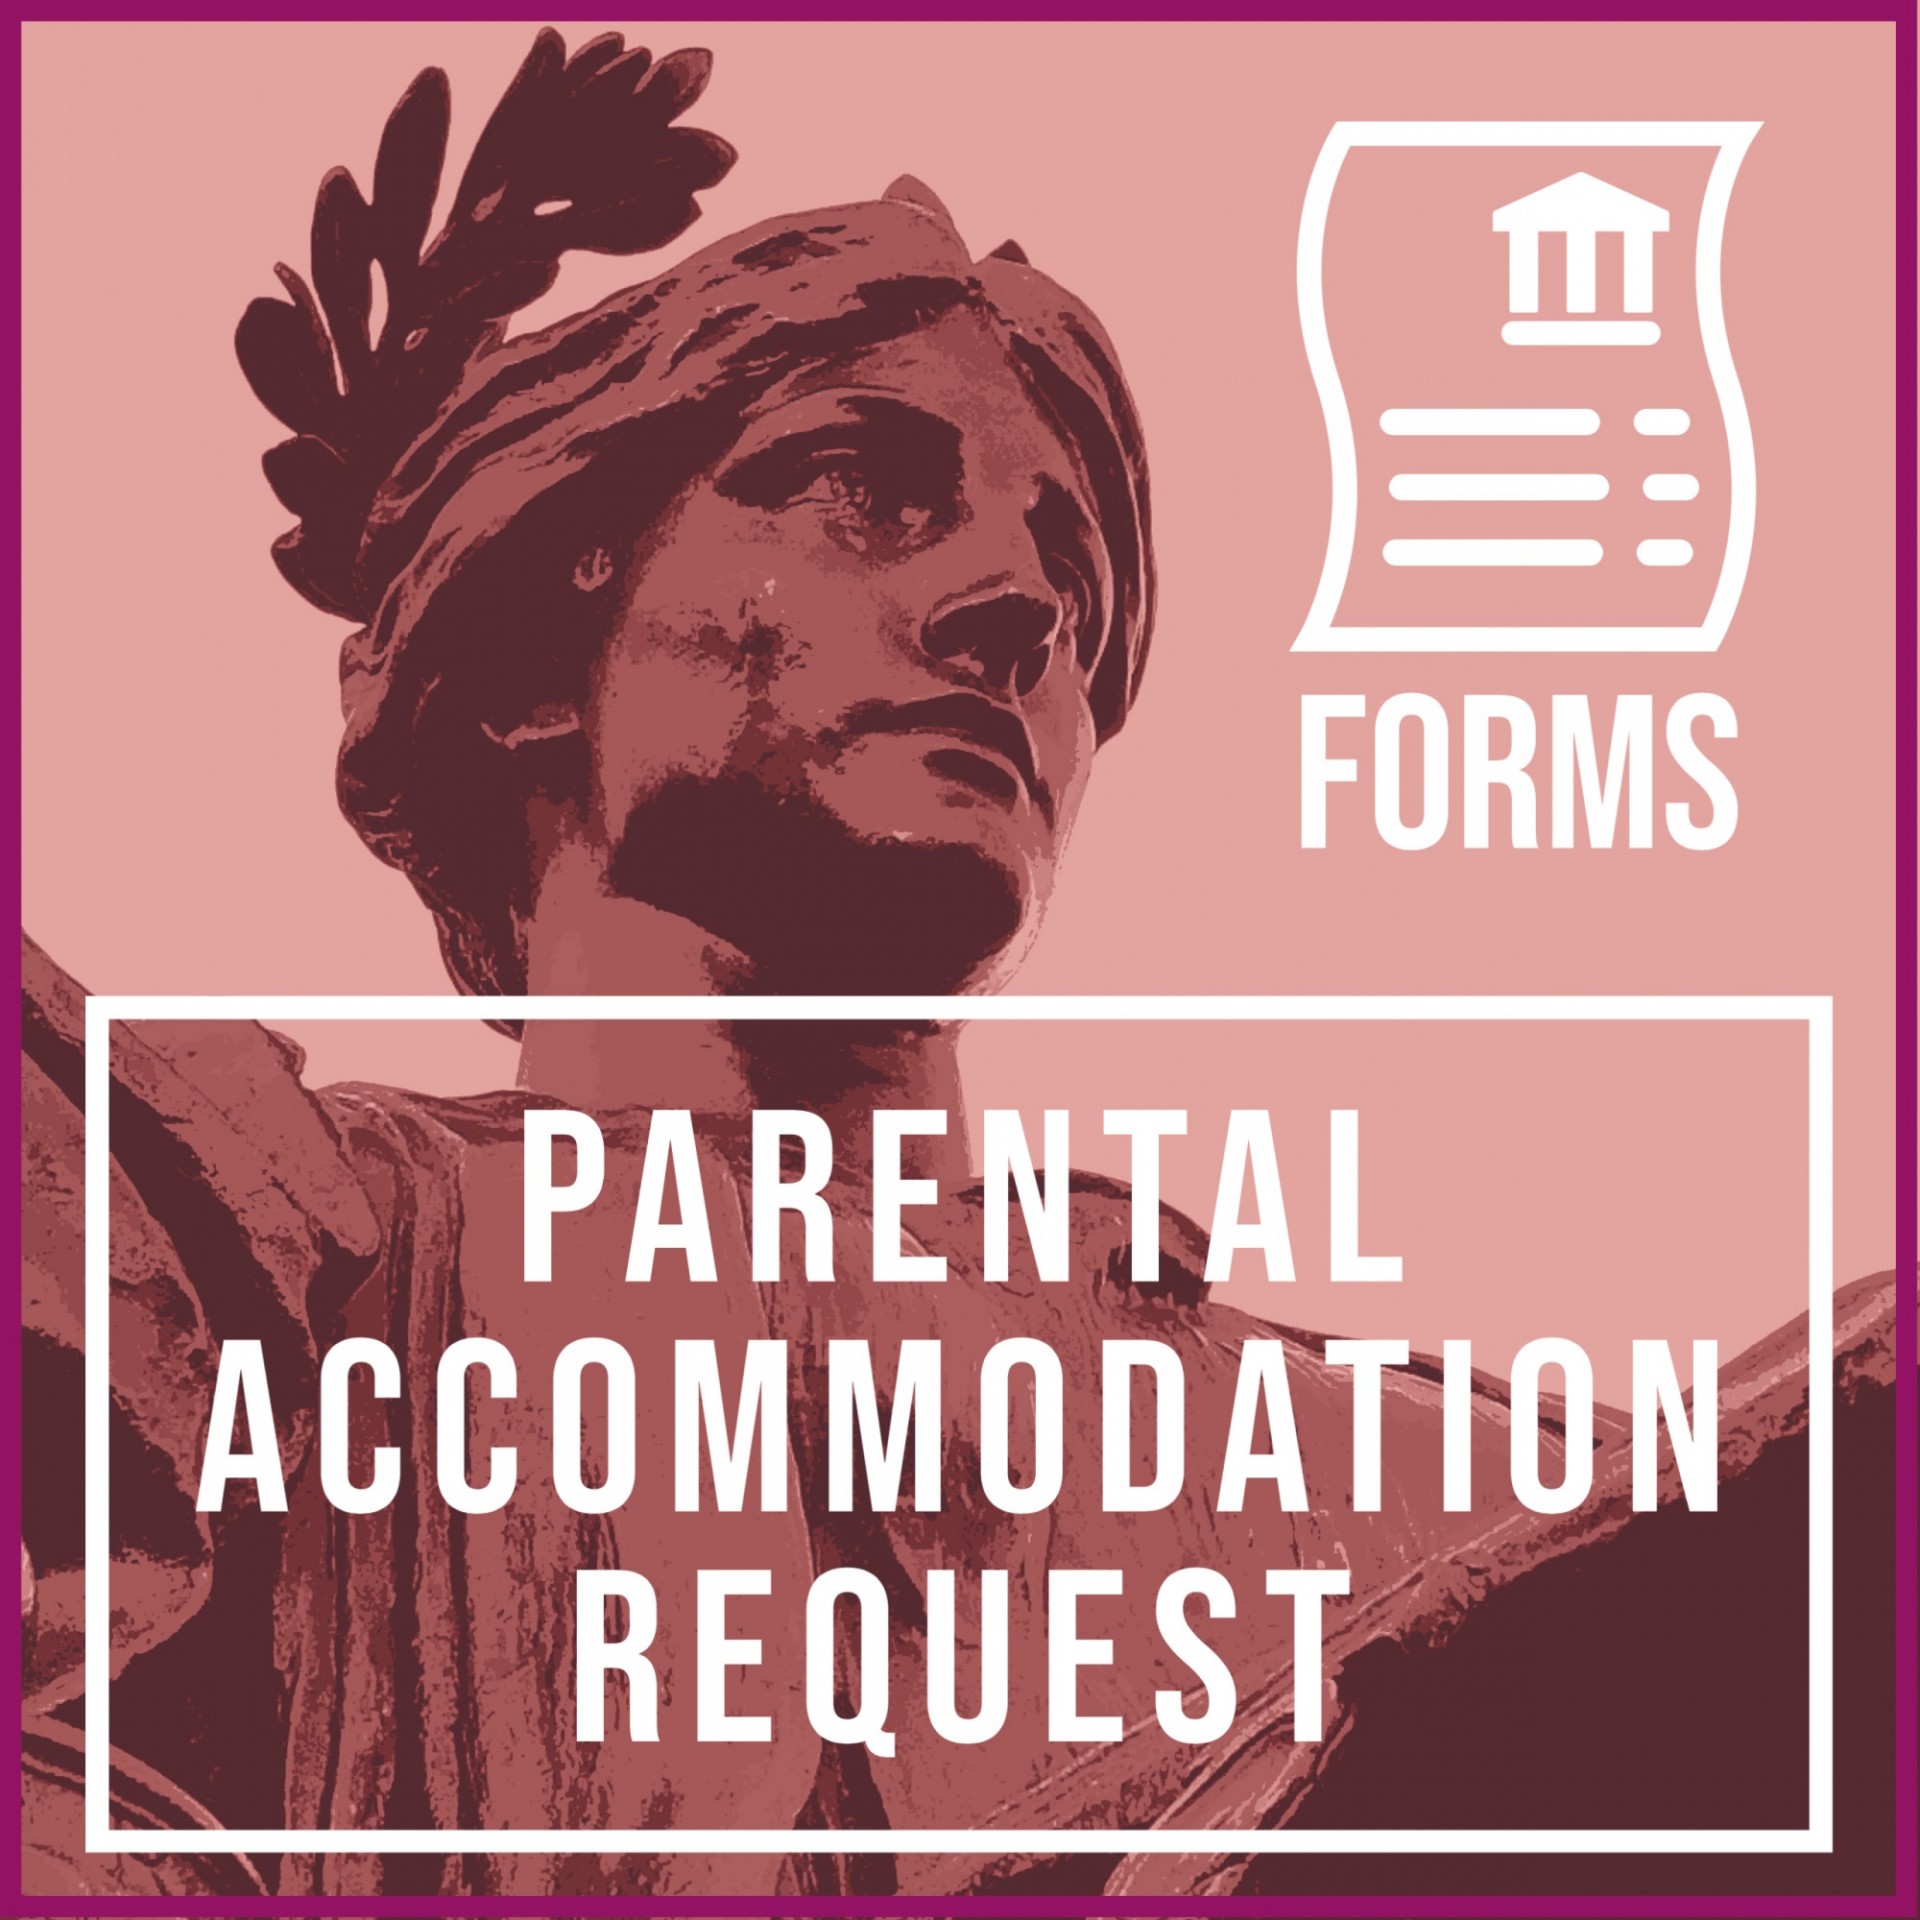 Forms Icon: Parental Accommodation Request